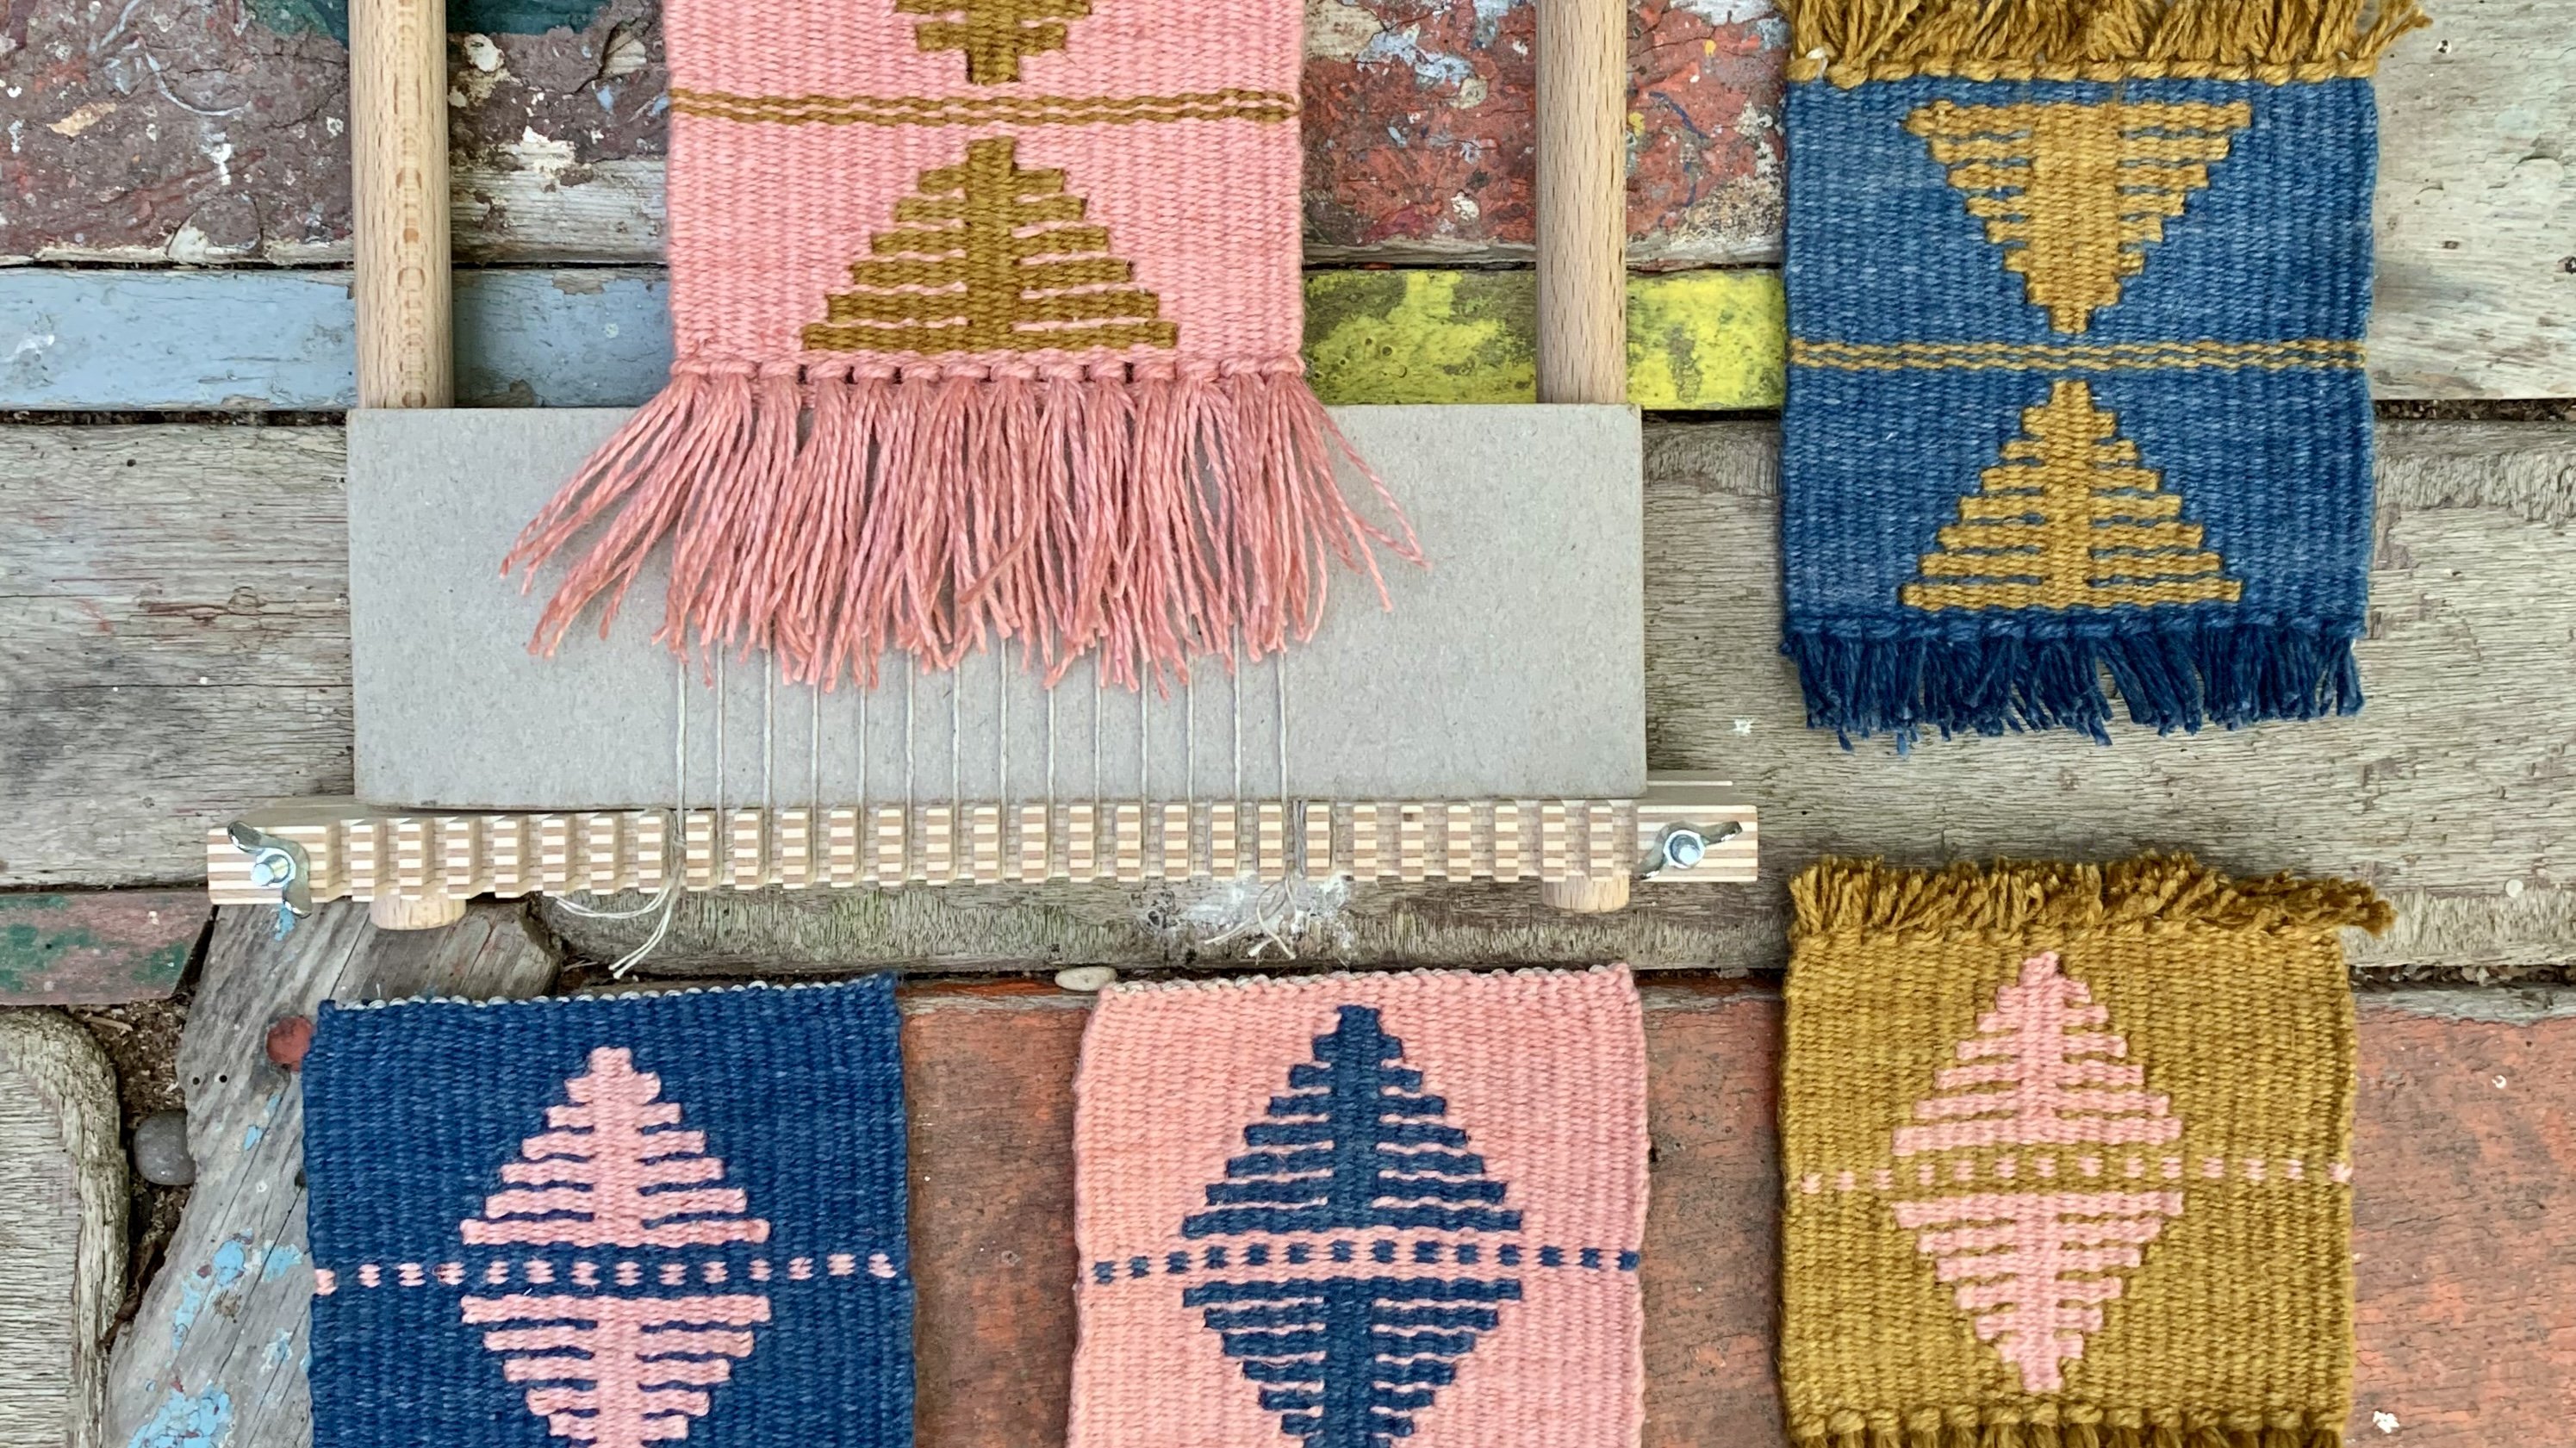 Frame Loom Weaving - A Comprehensive Guide to Becoming a Weaver